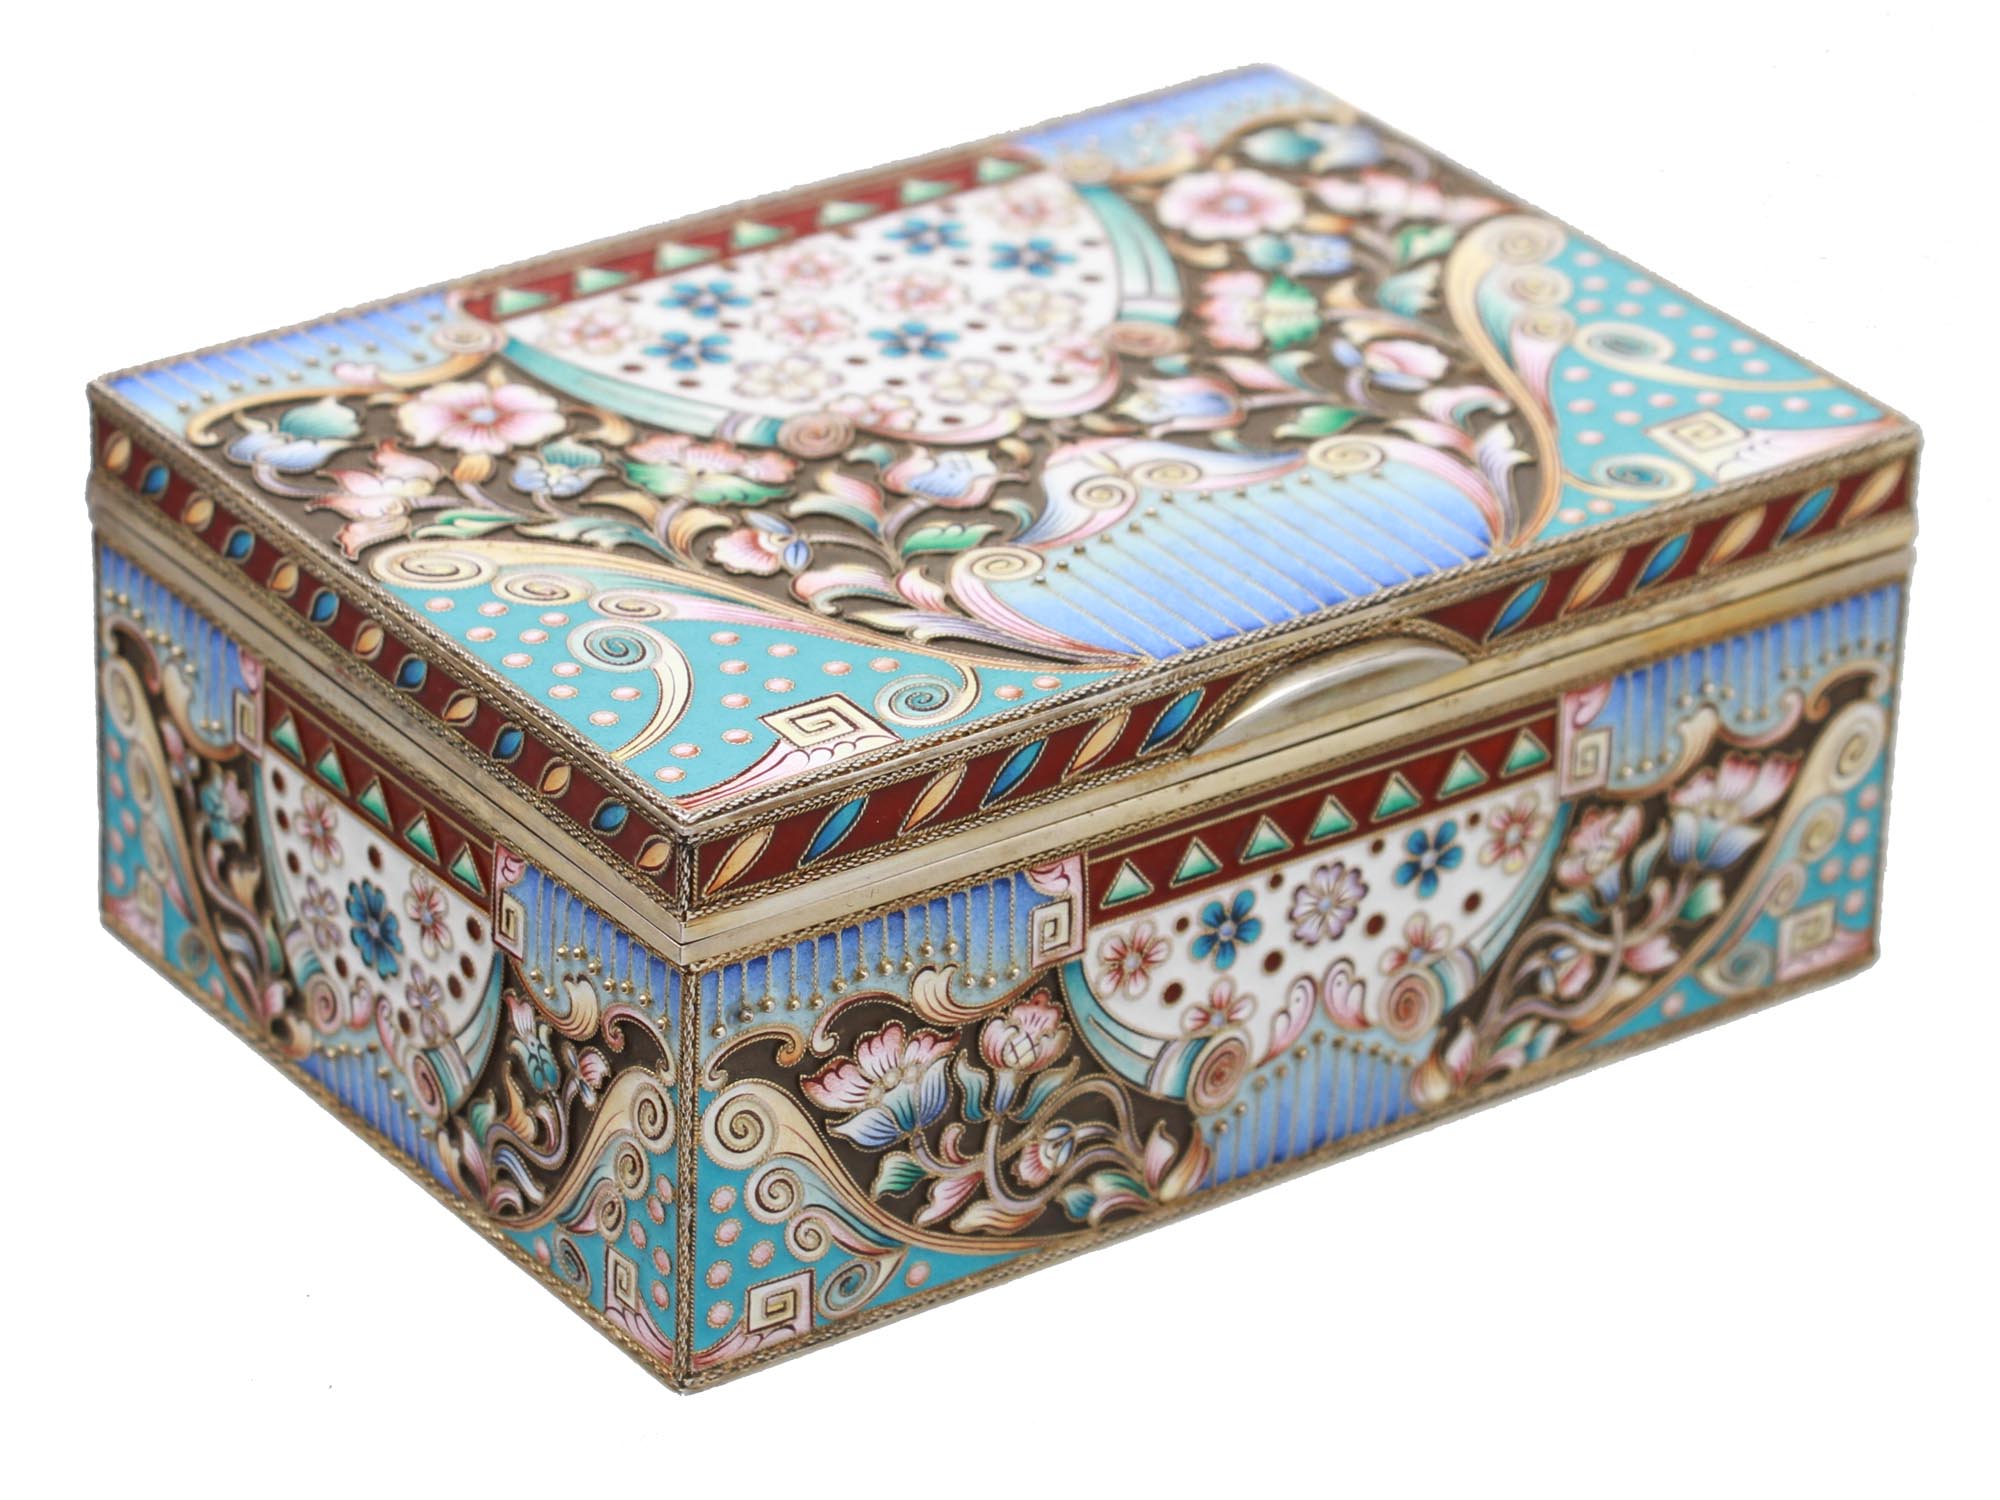 A RUSSIAN GILT SILVER AND CLOISONNE ENAMEL BOX PIC-0